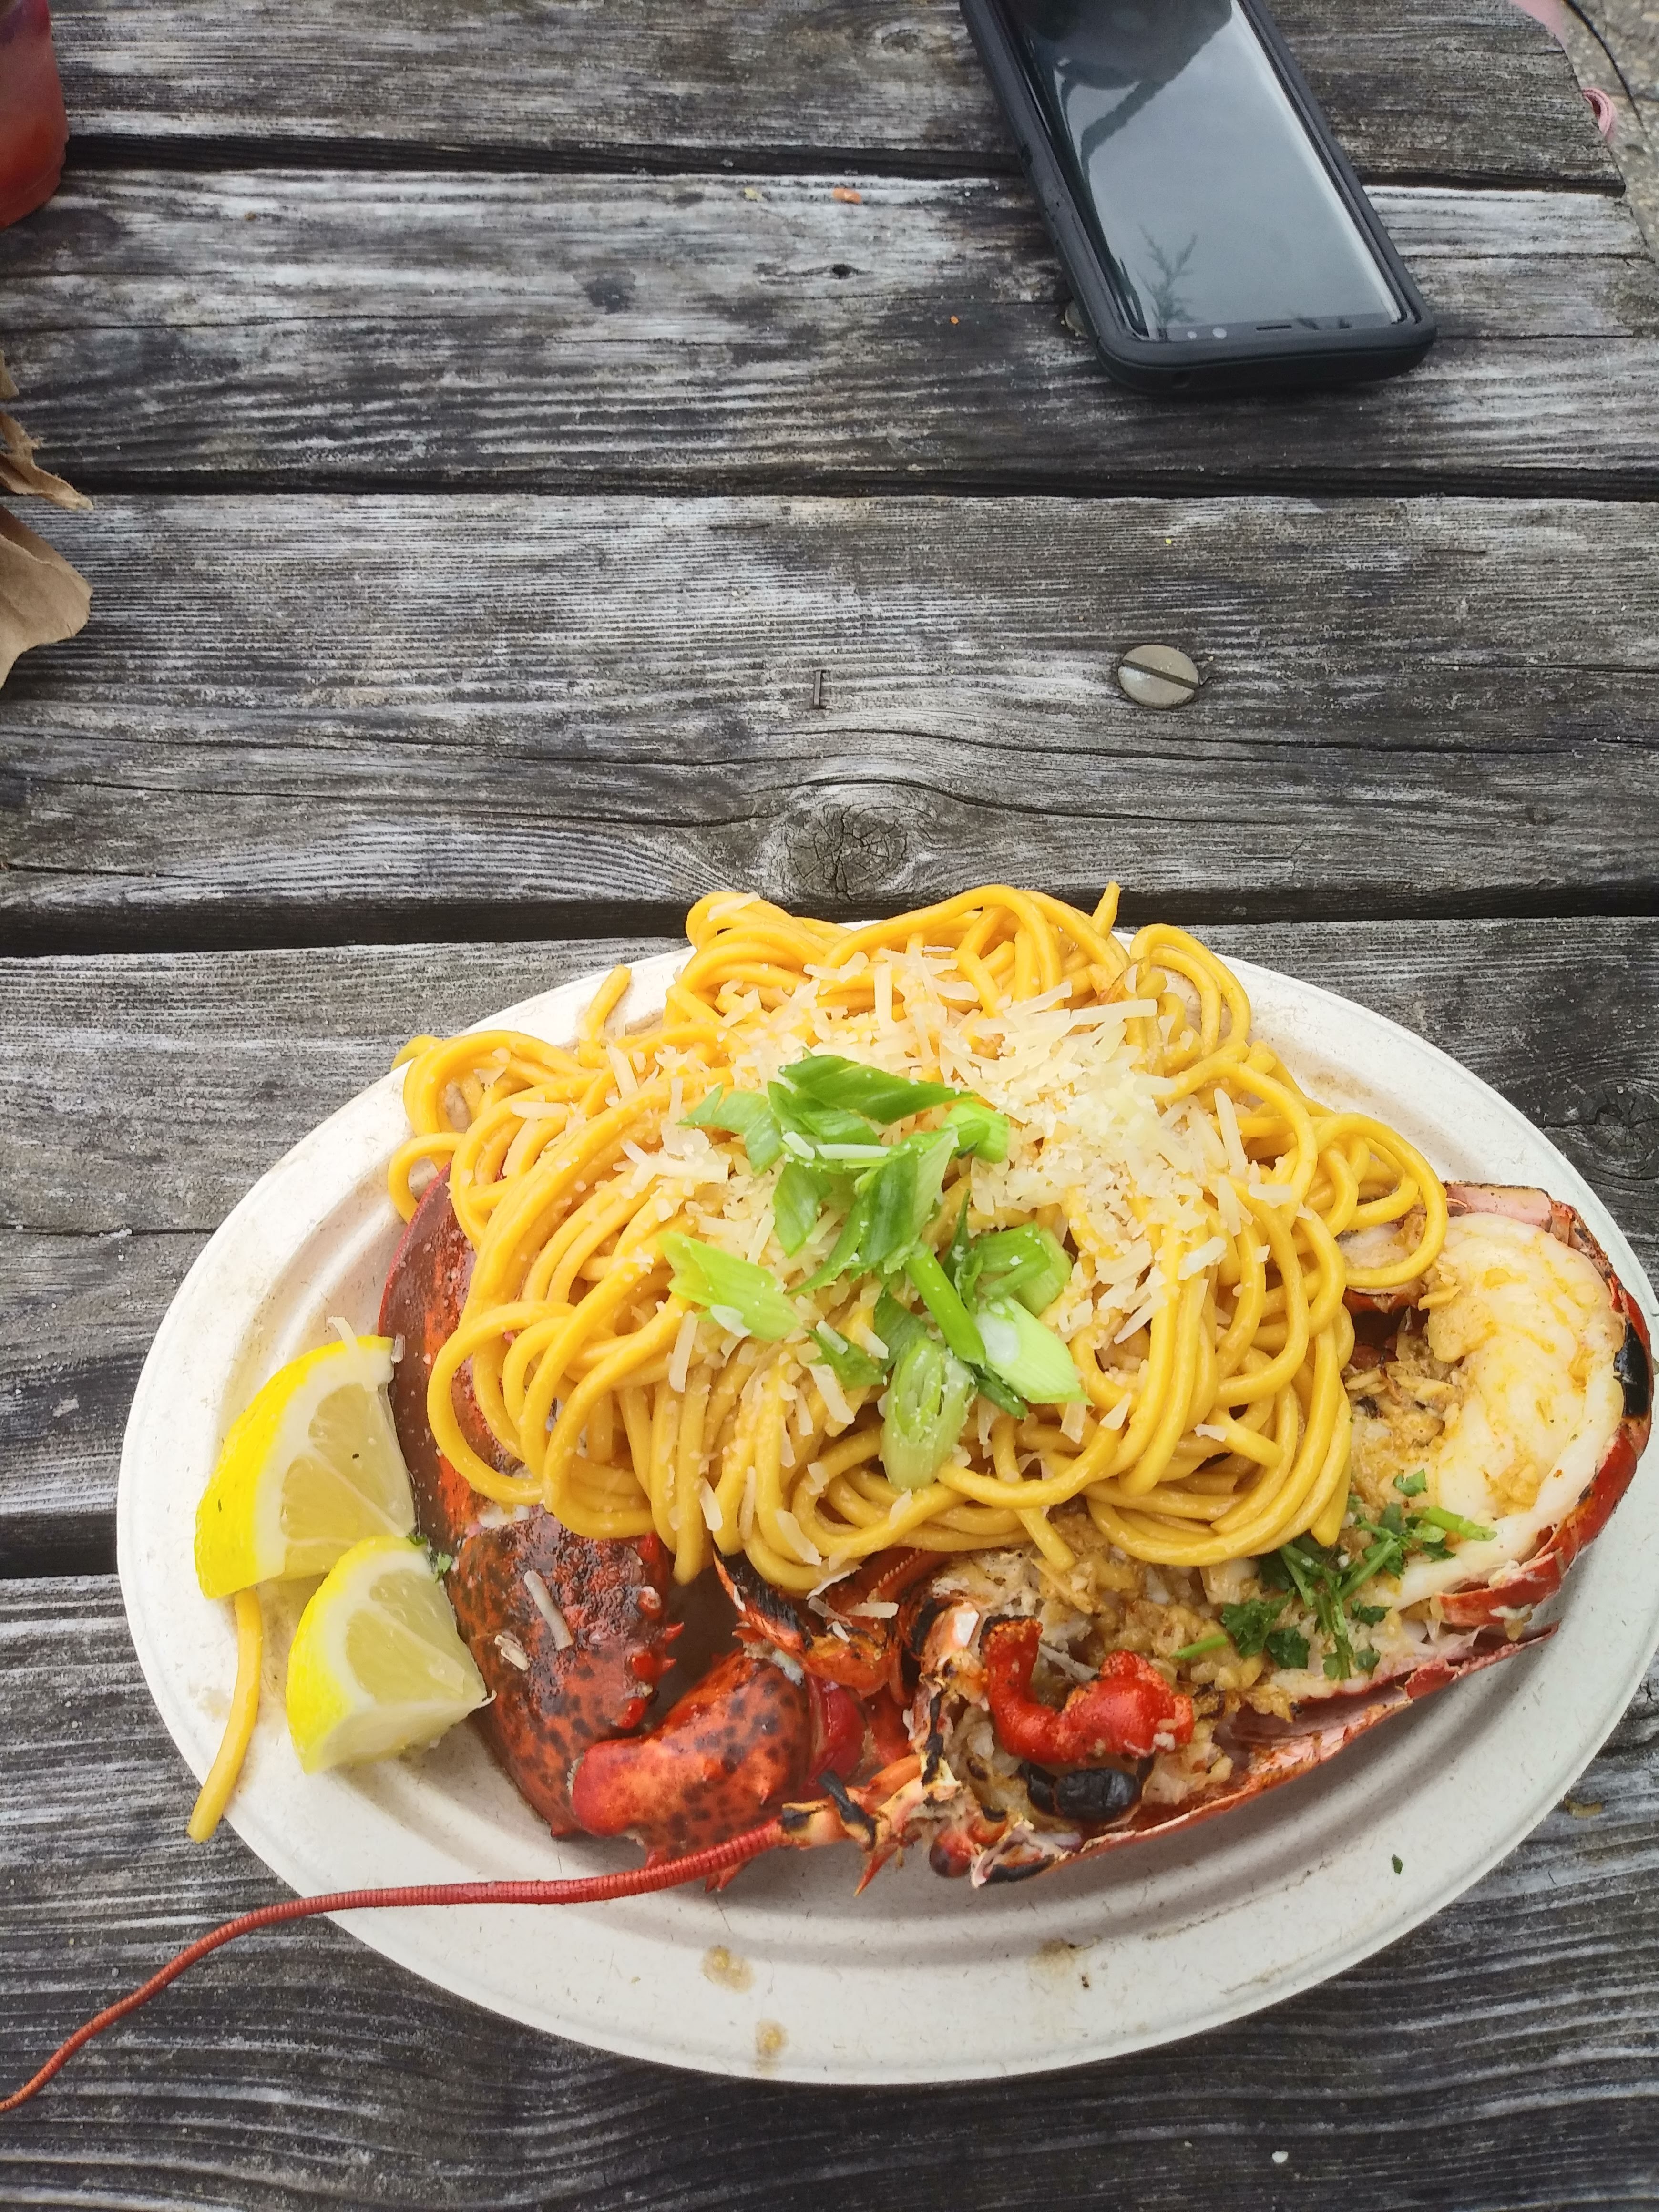 Plate of pasta and lobster for how to spend a sustinble day in NYC